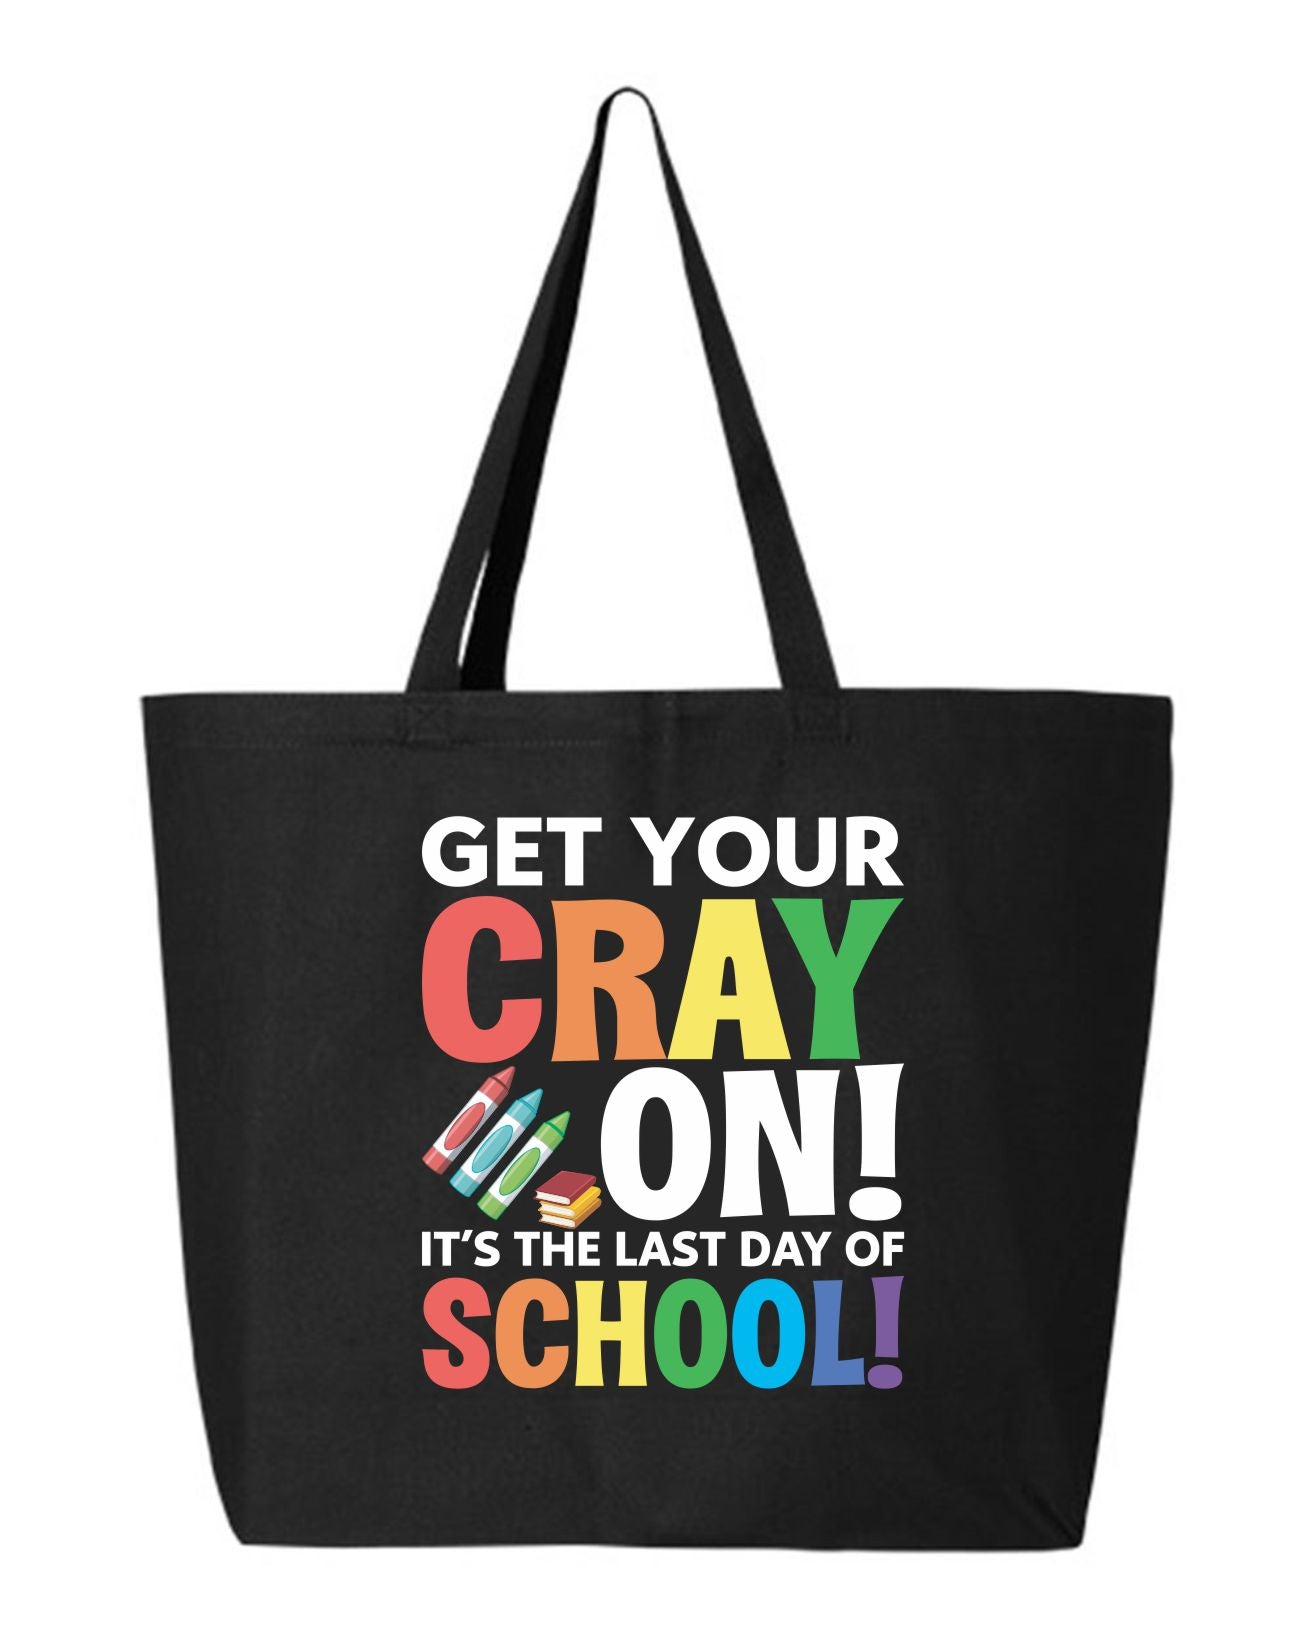 Get Your Cray On - Celebratory Last Day School Tote